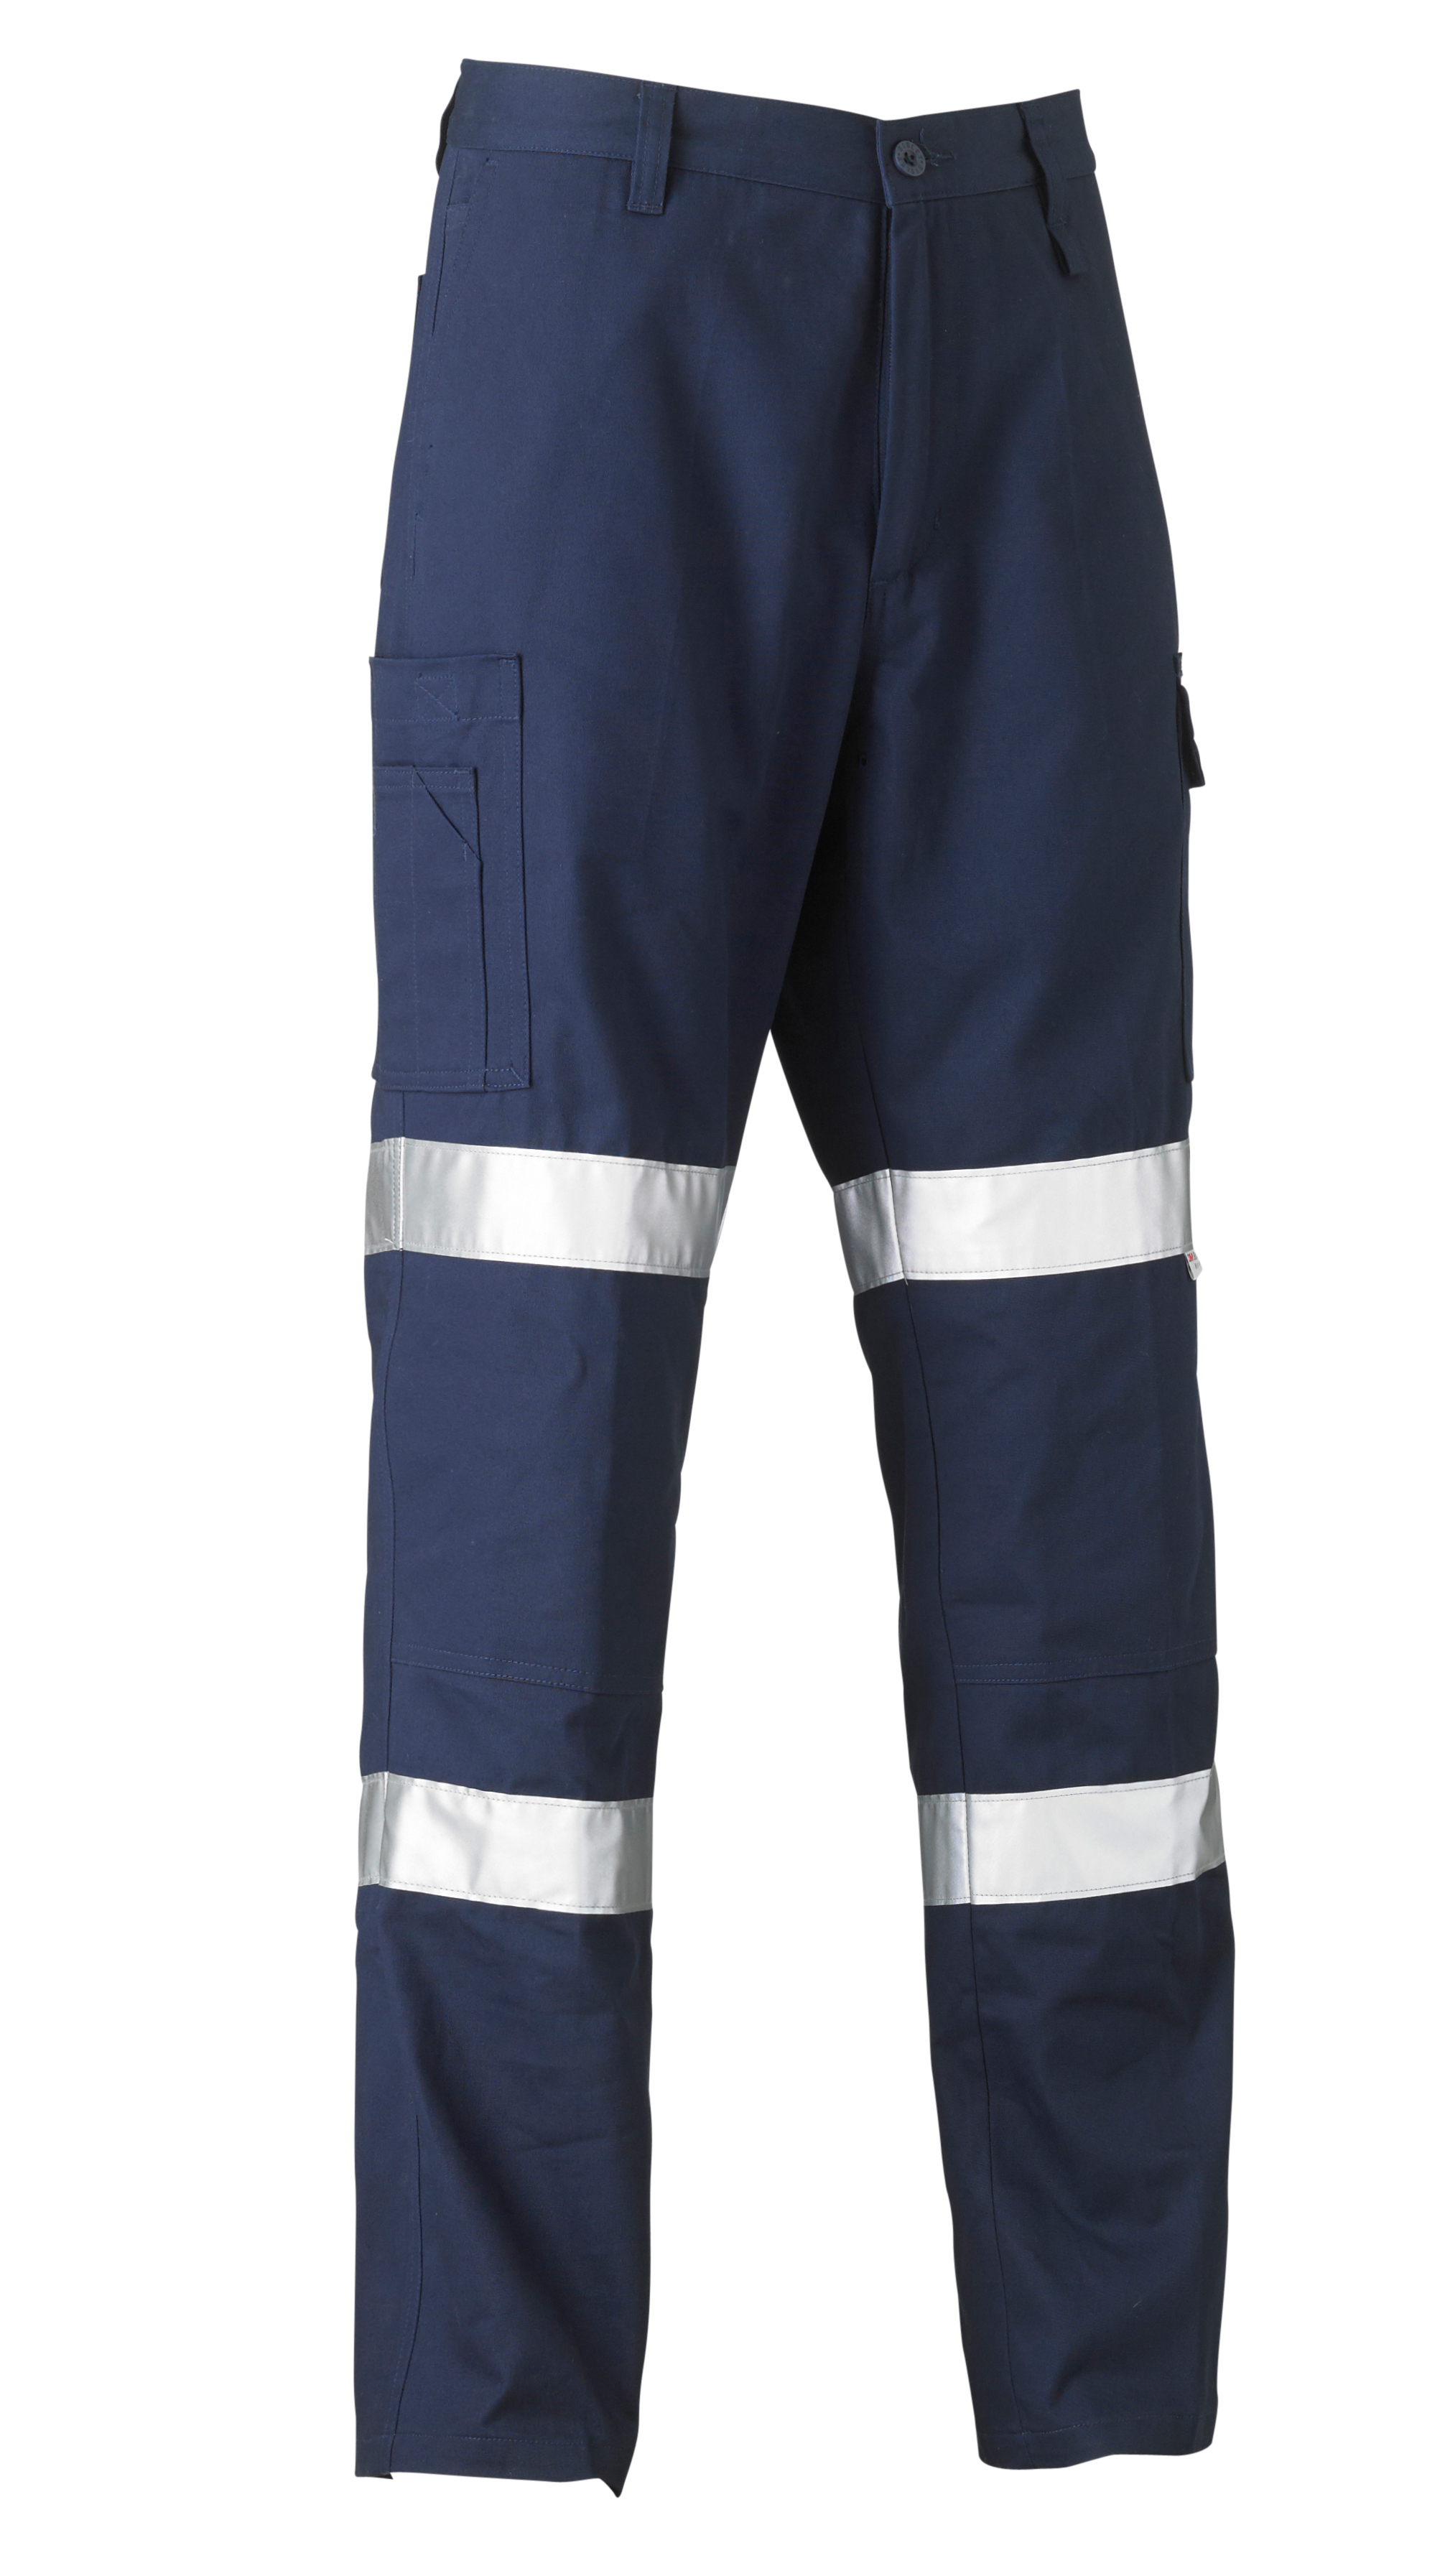 PANT UTILITY L/W TAPED NAVY 102R -BIOMOTION 240gsm